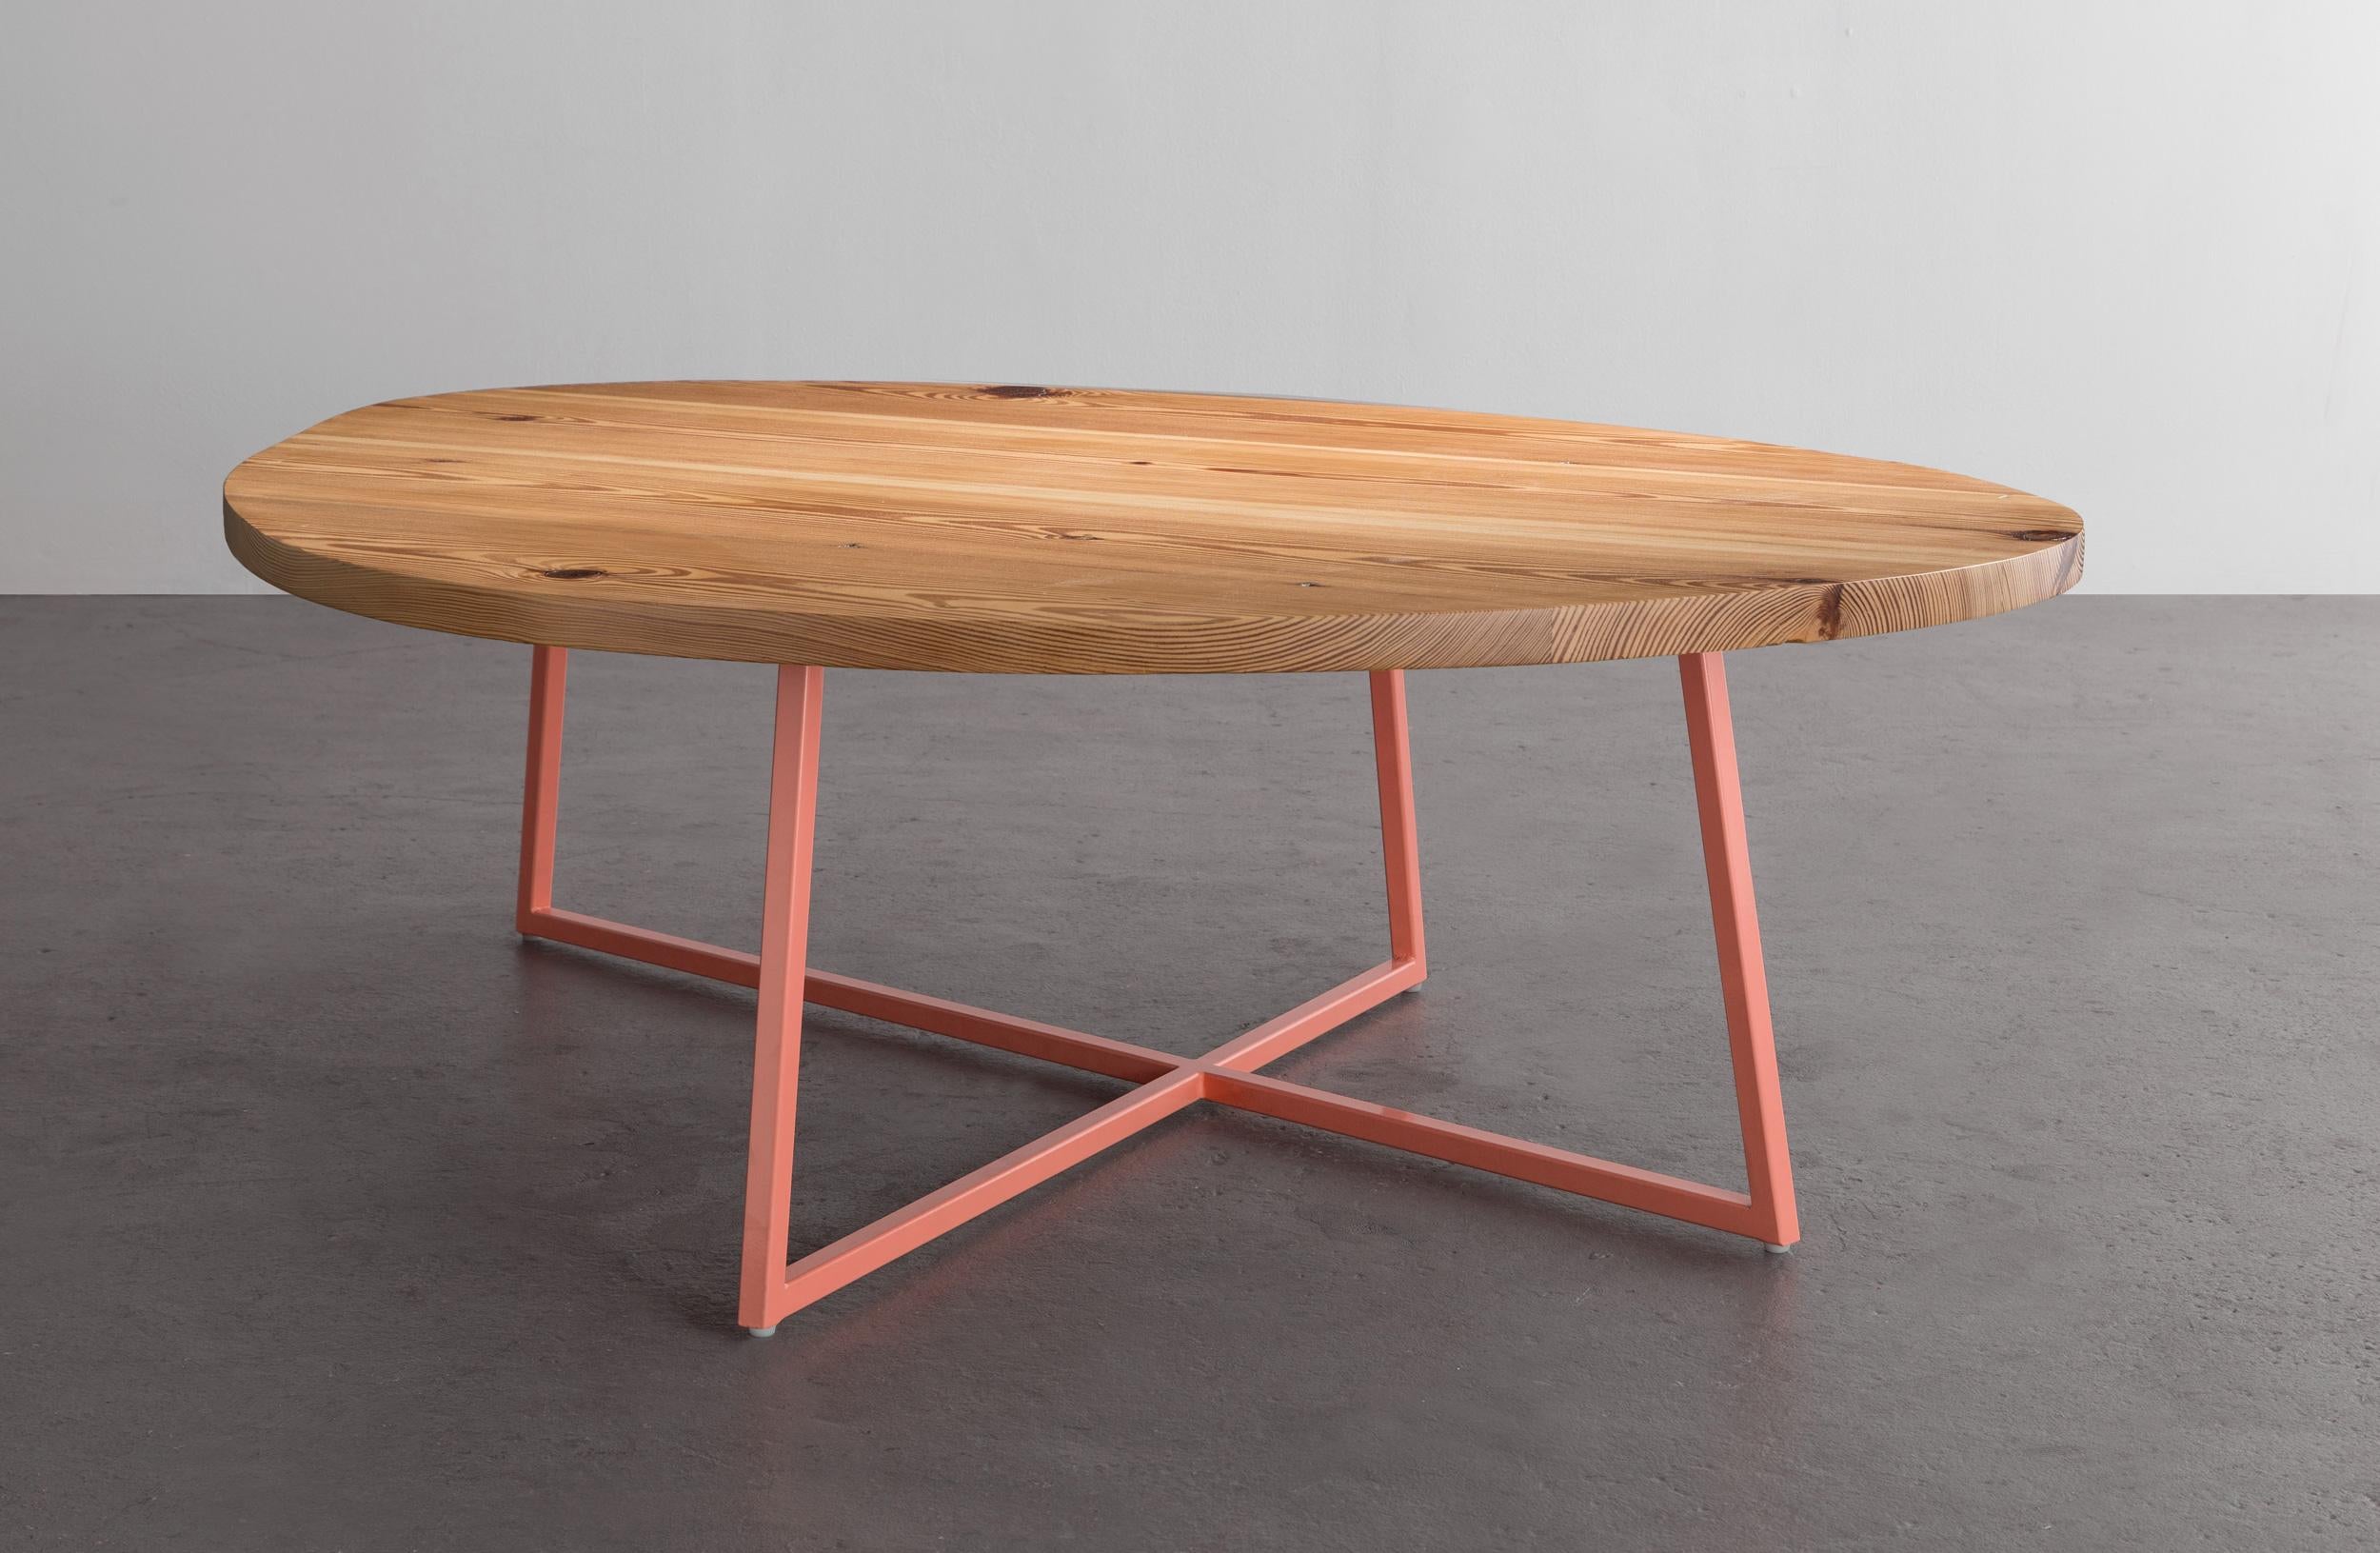 The Noguchoff coffee table is a casual and playful rendition of an iconic table through new line, surface, and color.

Shown in reclaimed heart pine and available in ash, cherry, maple, walnut, or white oak. 
Frame shown in coral powder coat and